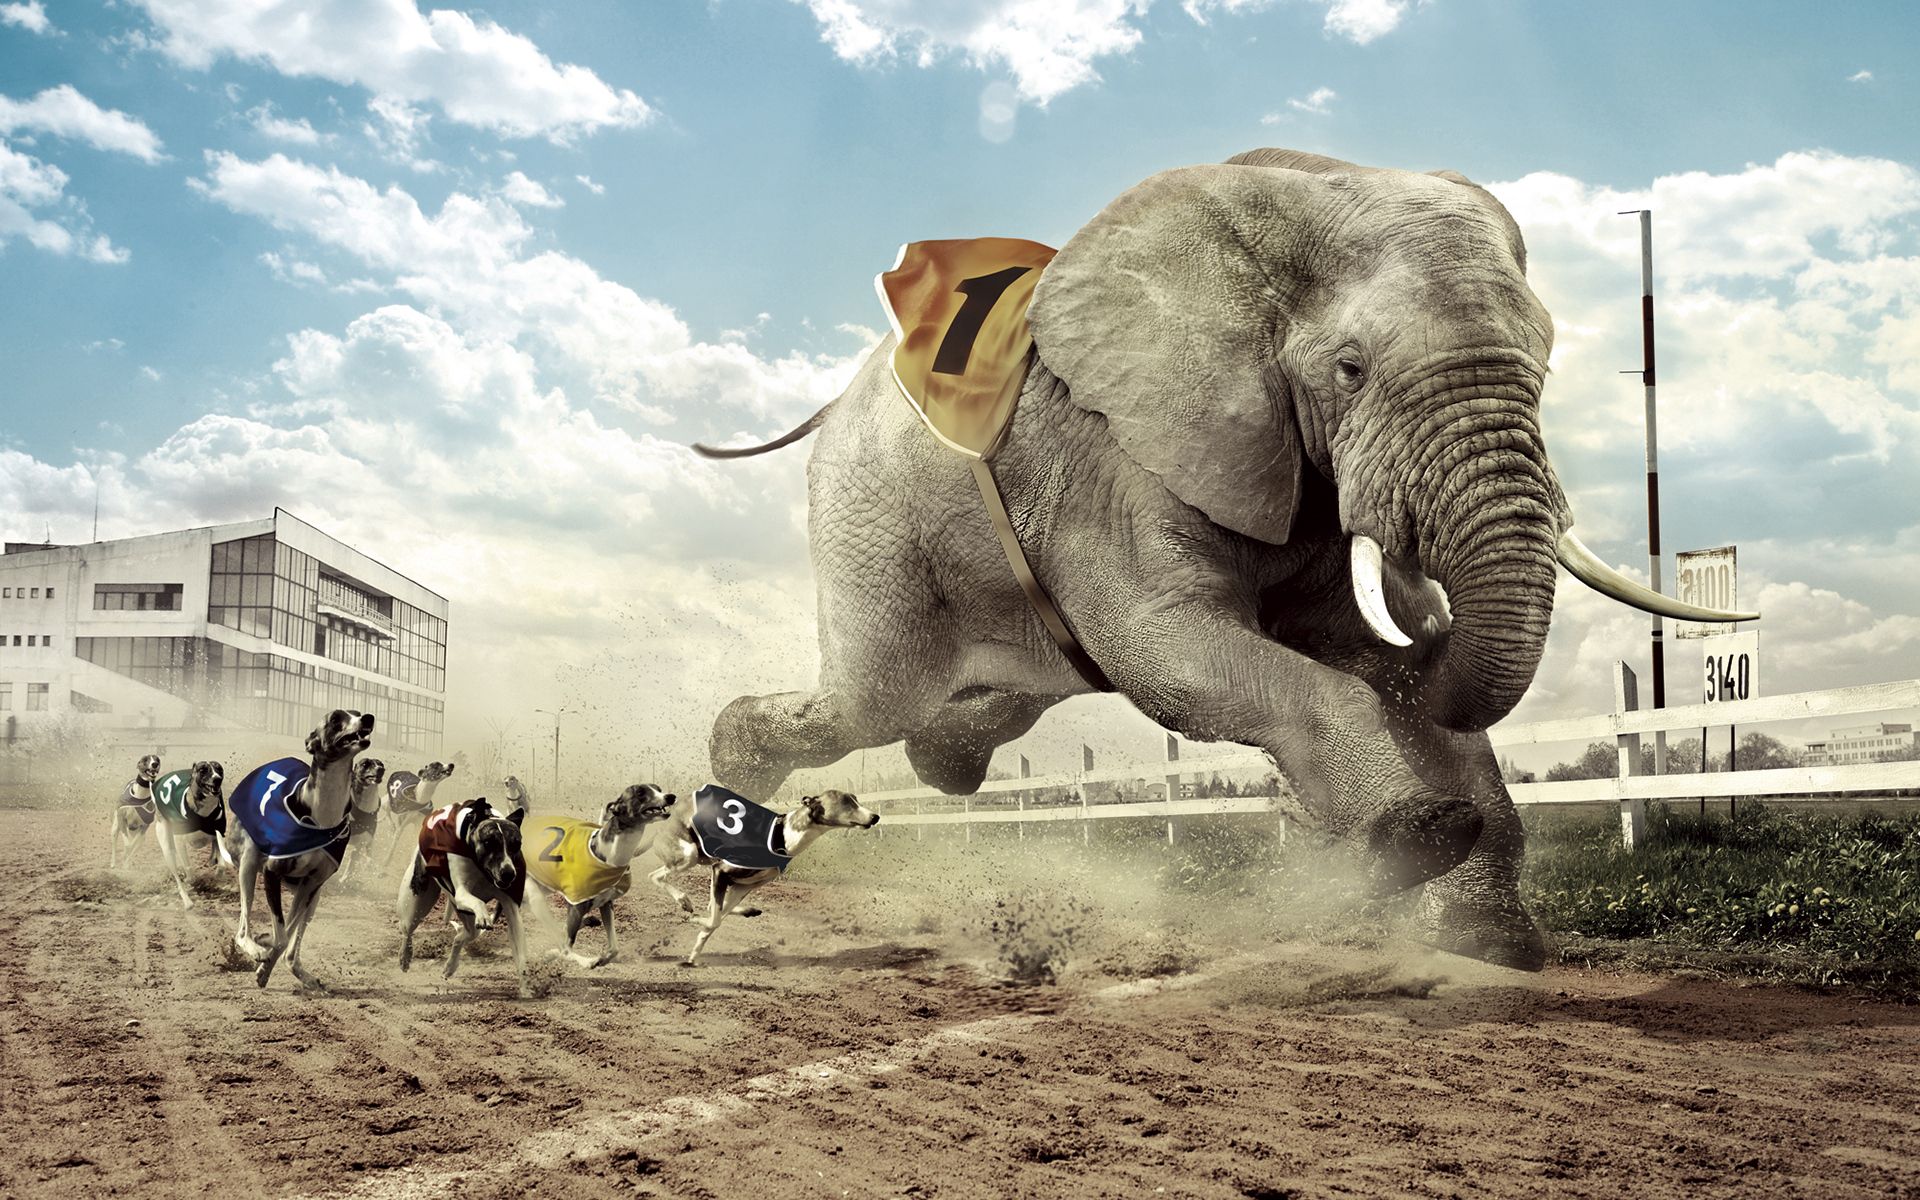 Mobile Wallpaper: Free HD Download [HQ] race, grass, elephant, house